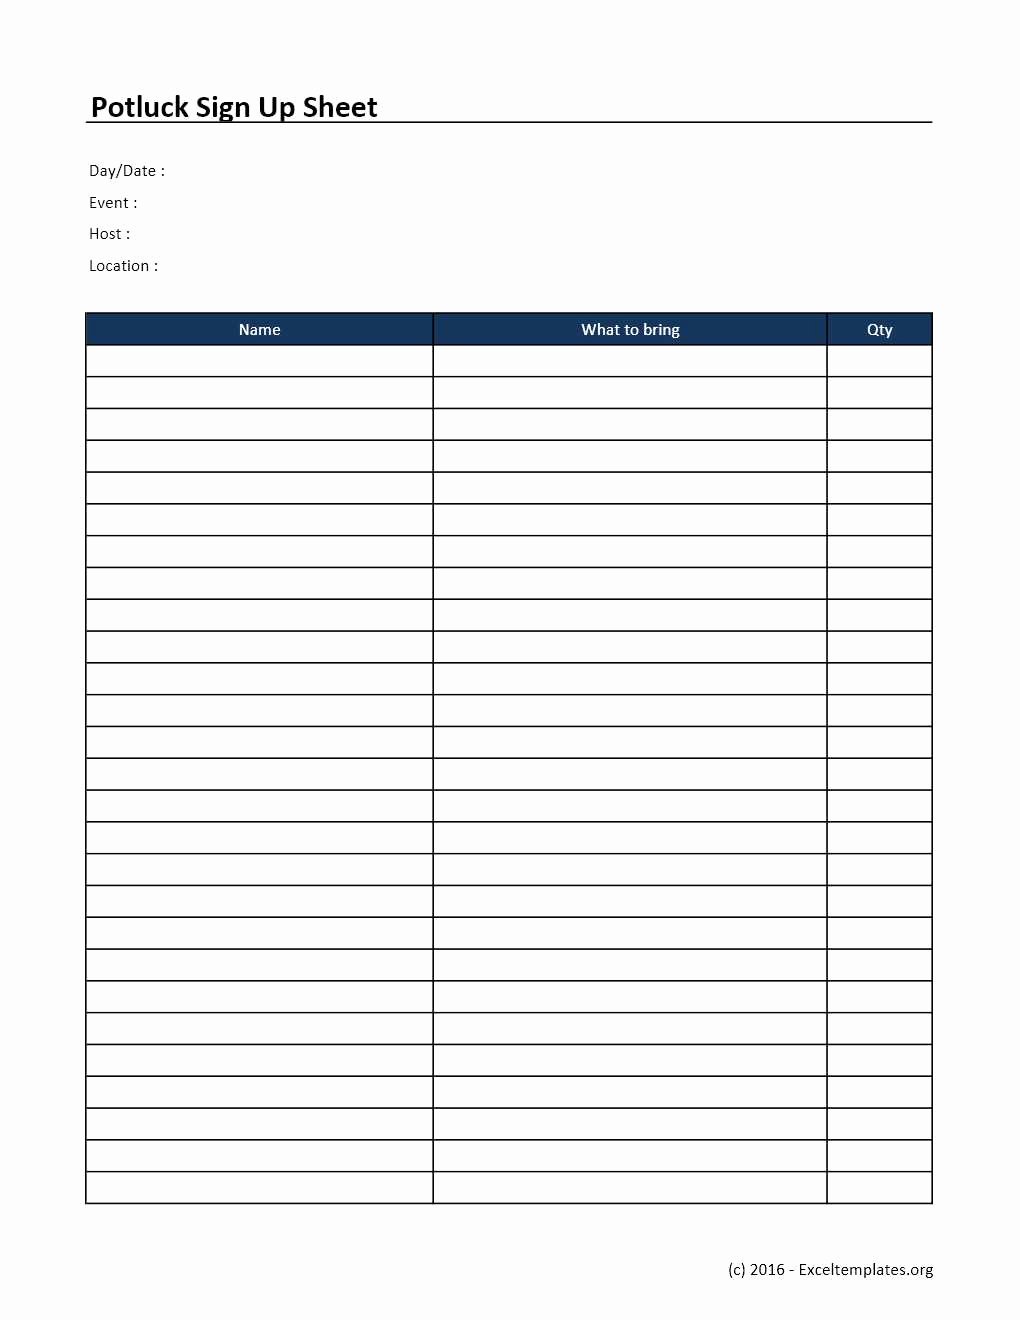 Potluck Sign Up Sheet Template Excel Templates